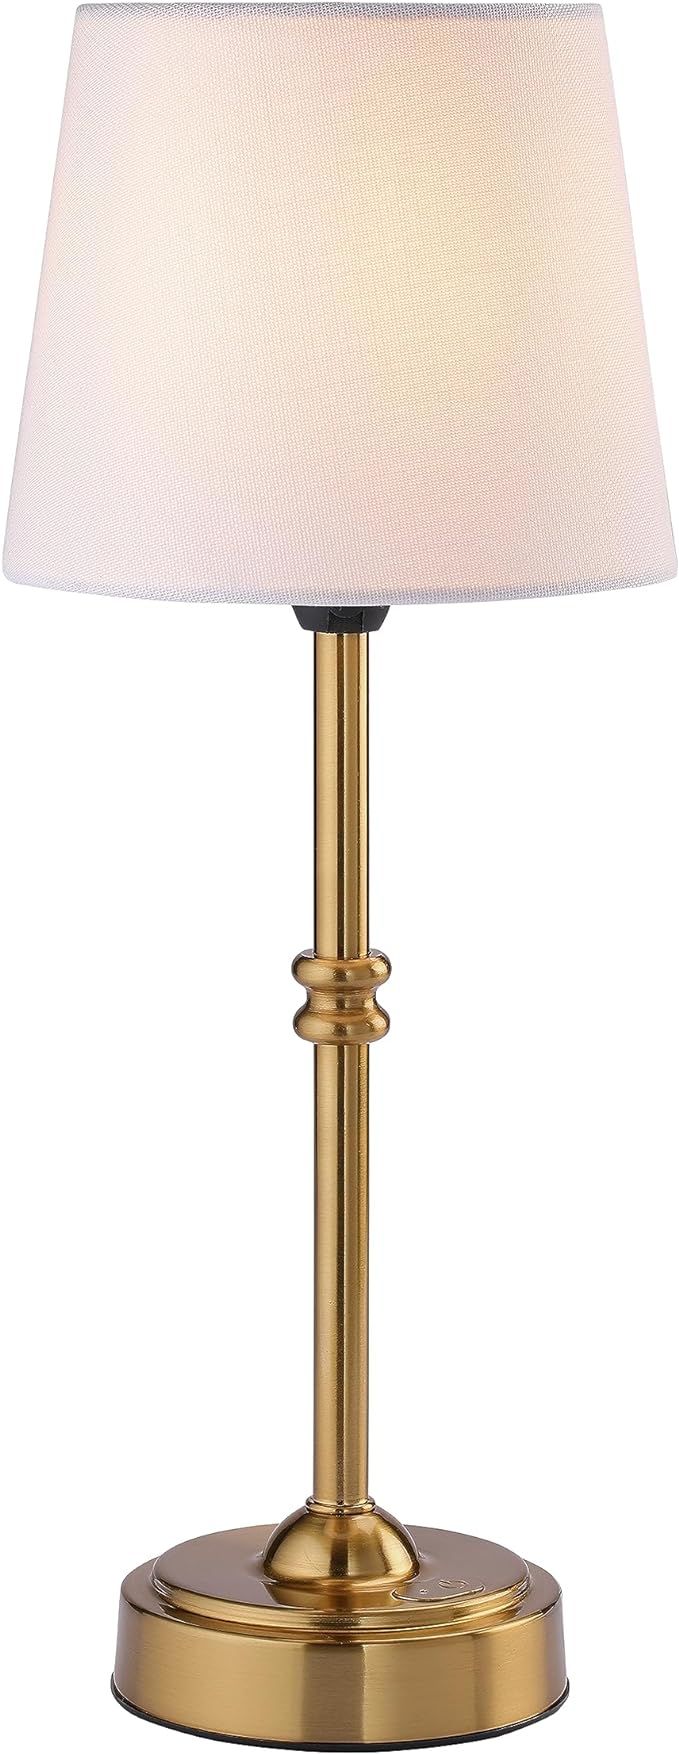 O’Bright Seraph - Cordless LED Table Lamp with Dimmer, Built-in Rechargeable Battery, 3-Level Brightness, Patio Table Lamp, Bedside Night Lamp, Ambient Light for Restaurant, Antique Brass | Amazon (US)